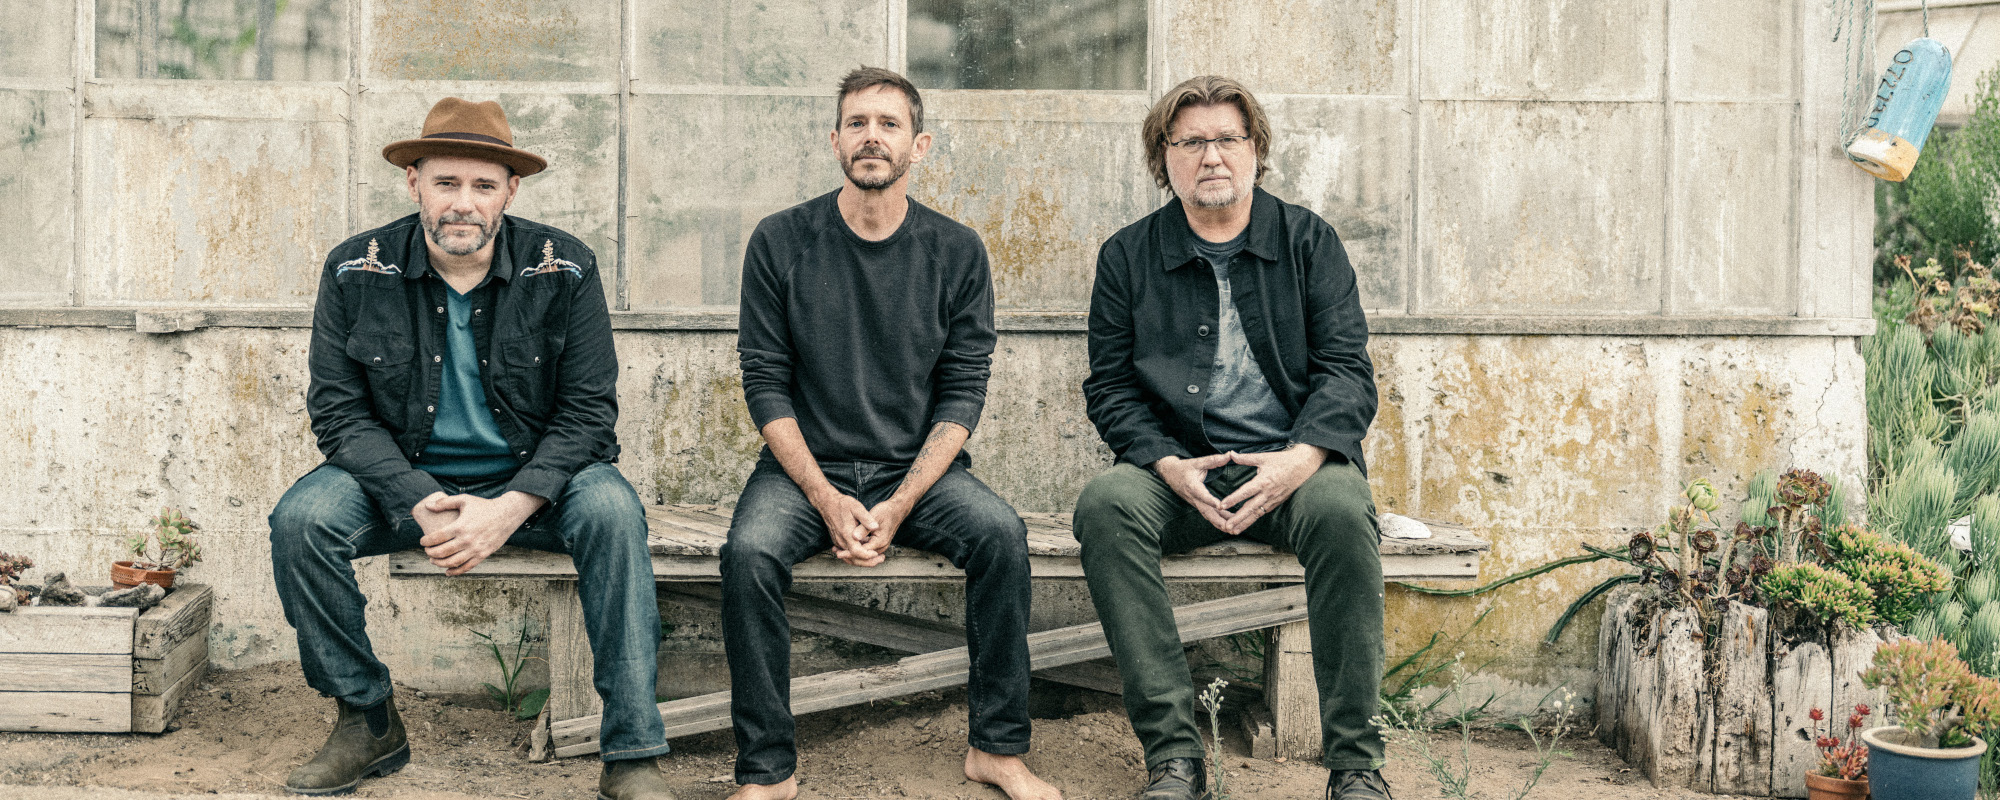 Toad The Wet Sprocket Announces Greatest Hits Album and Summer Tour Dates